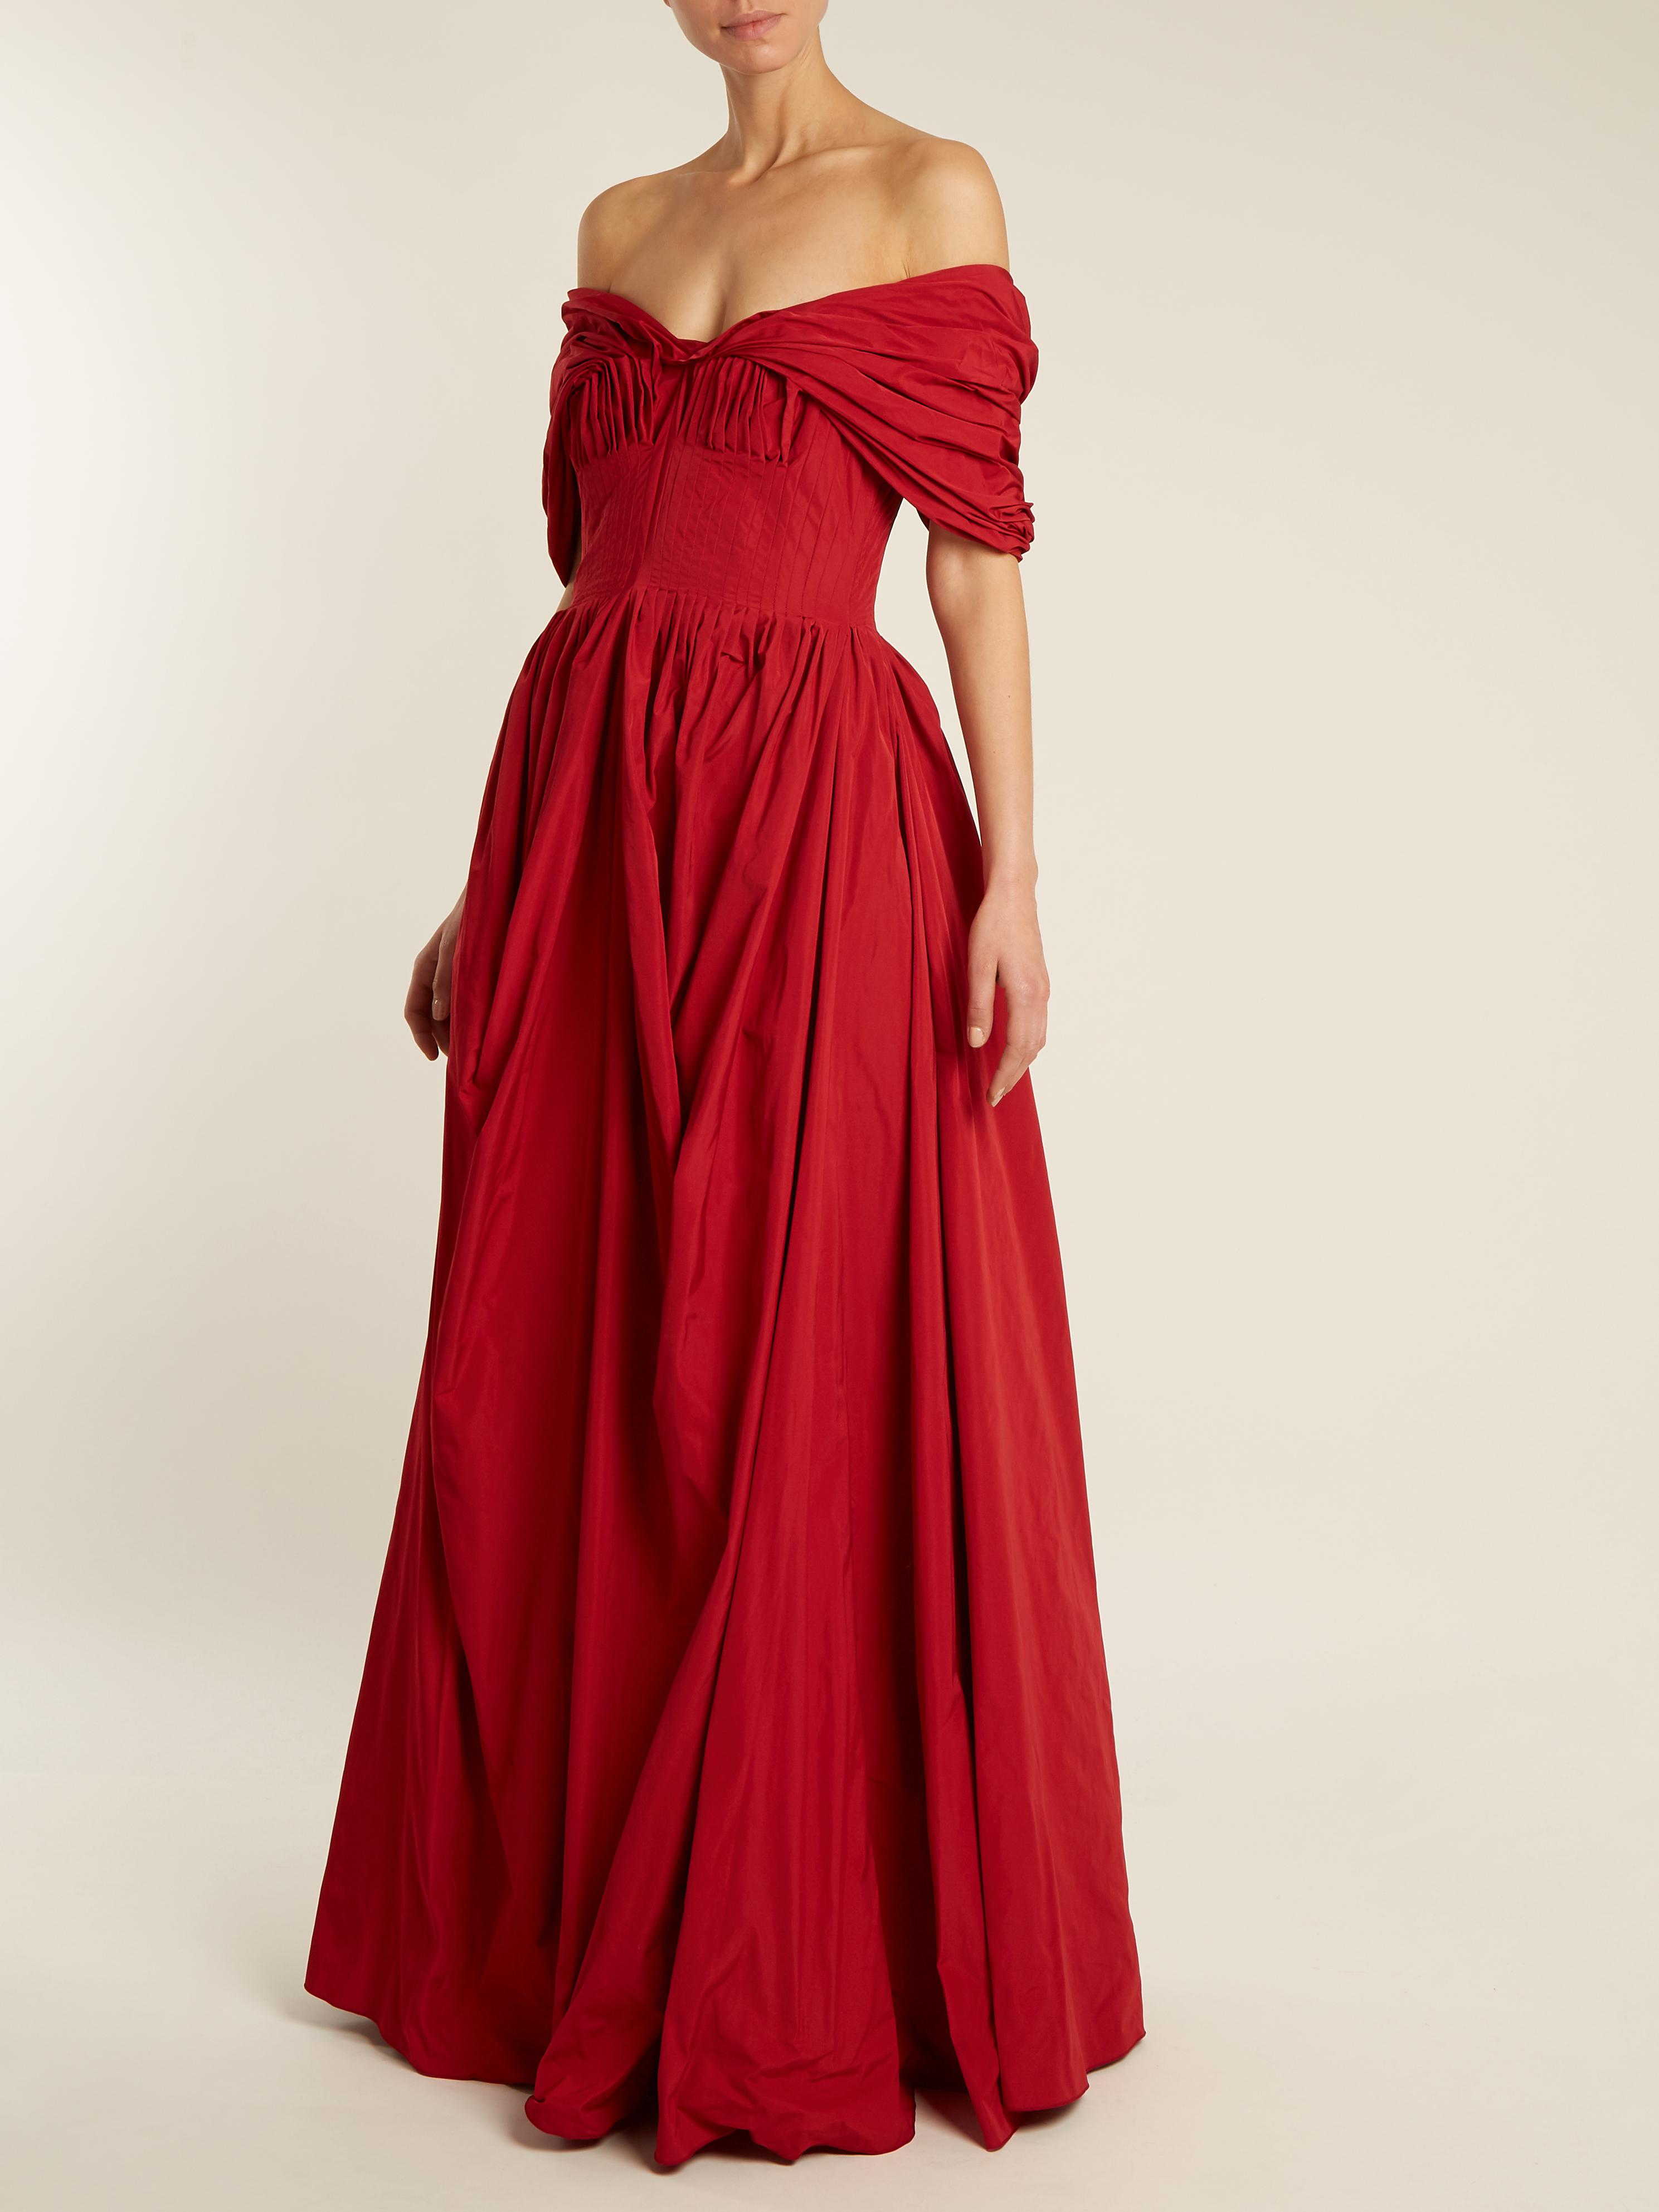 Brock Collection Dionne Off-the-shoulder Taffeta Gown in Red | Lyst